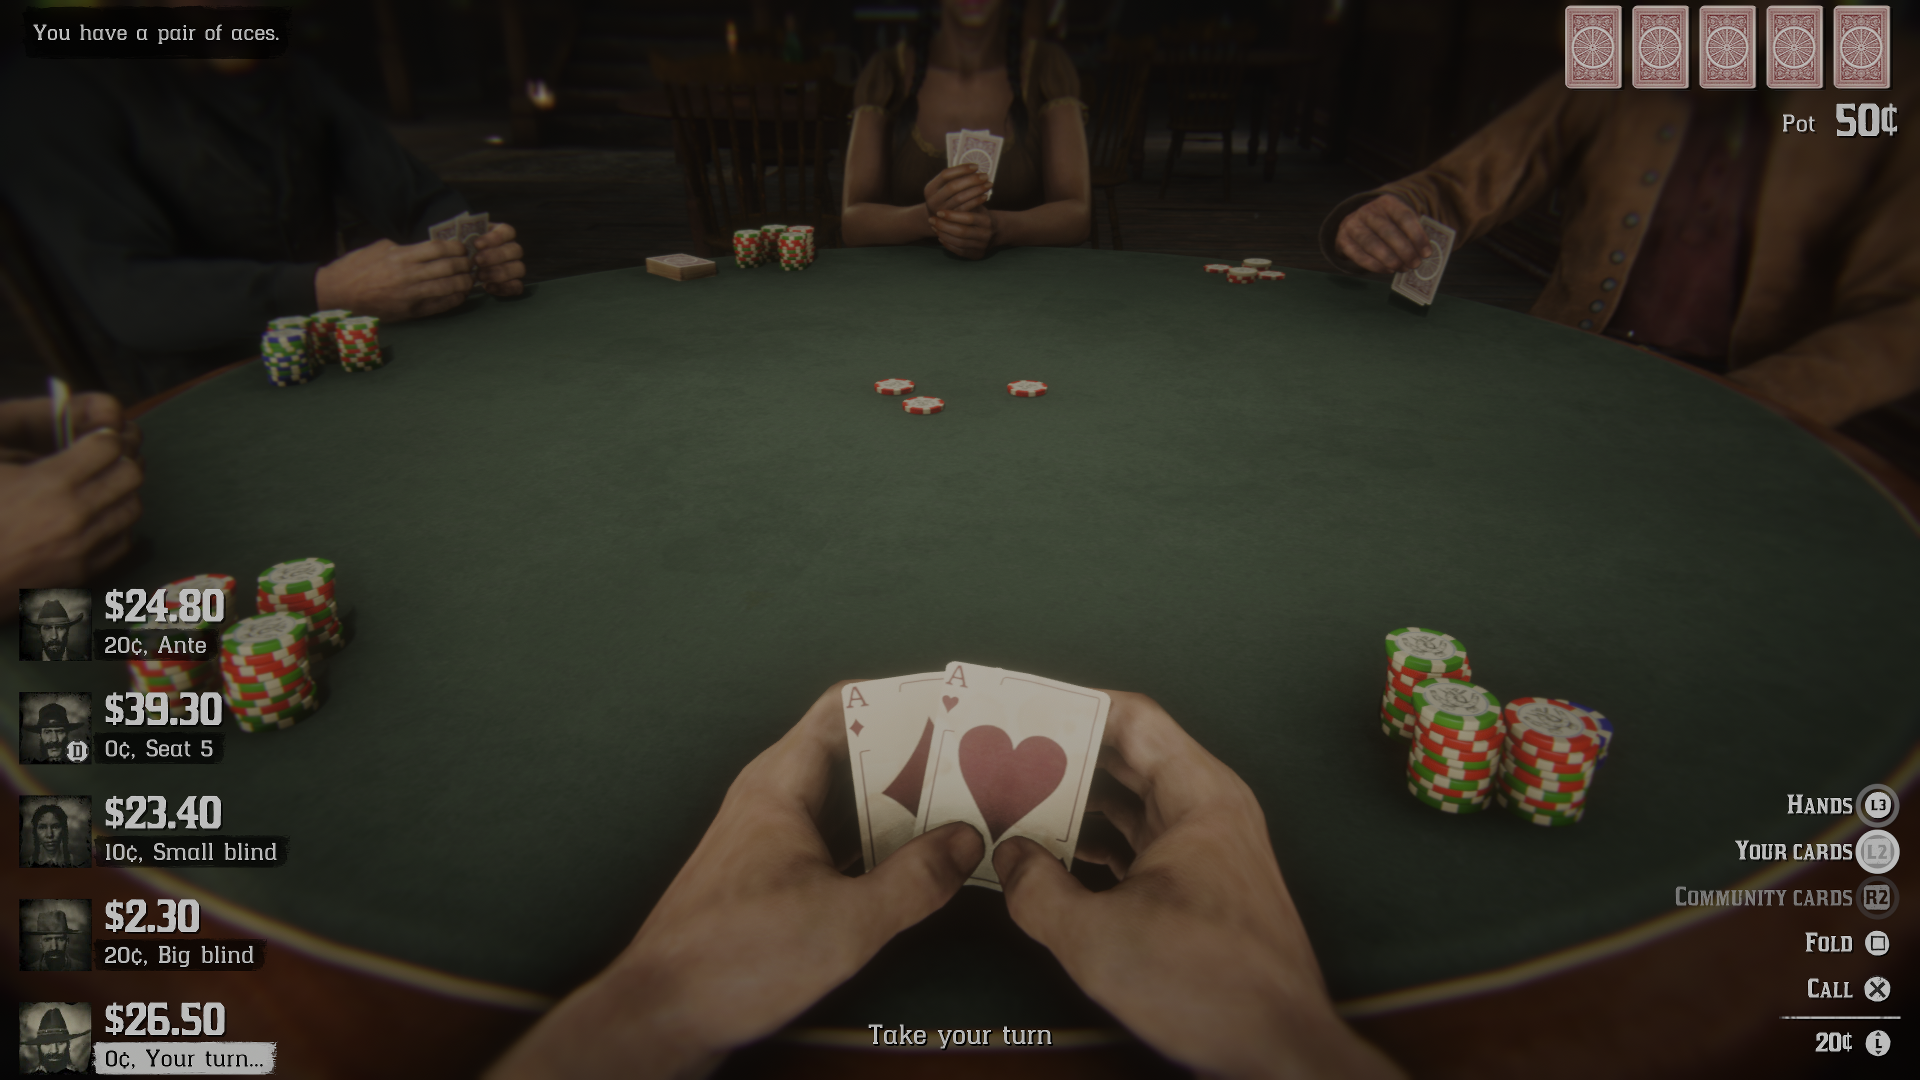 Poker In Red Dead Online Is Not Available Everywhere Due To Regional Laws